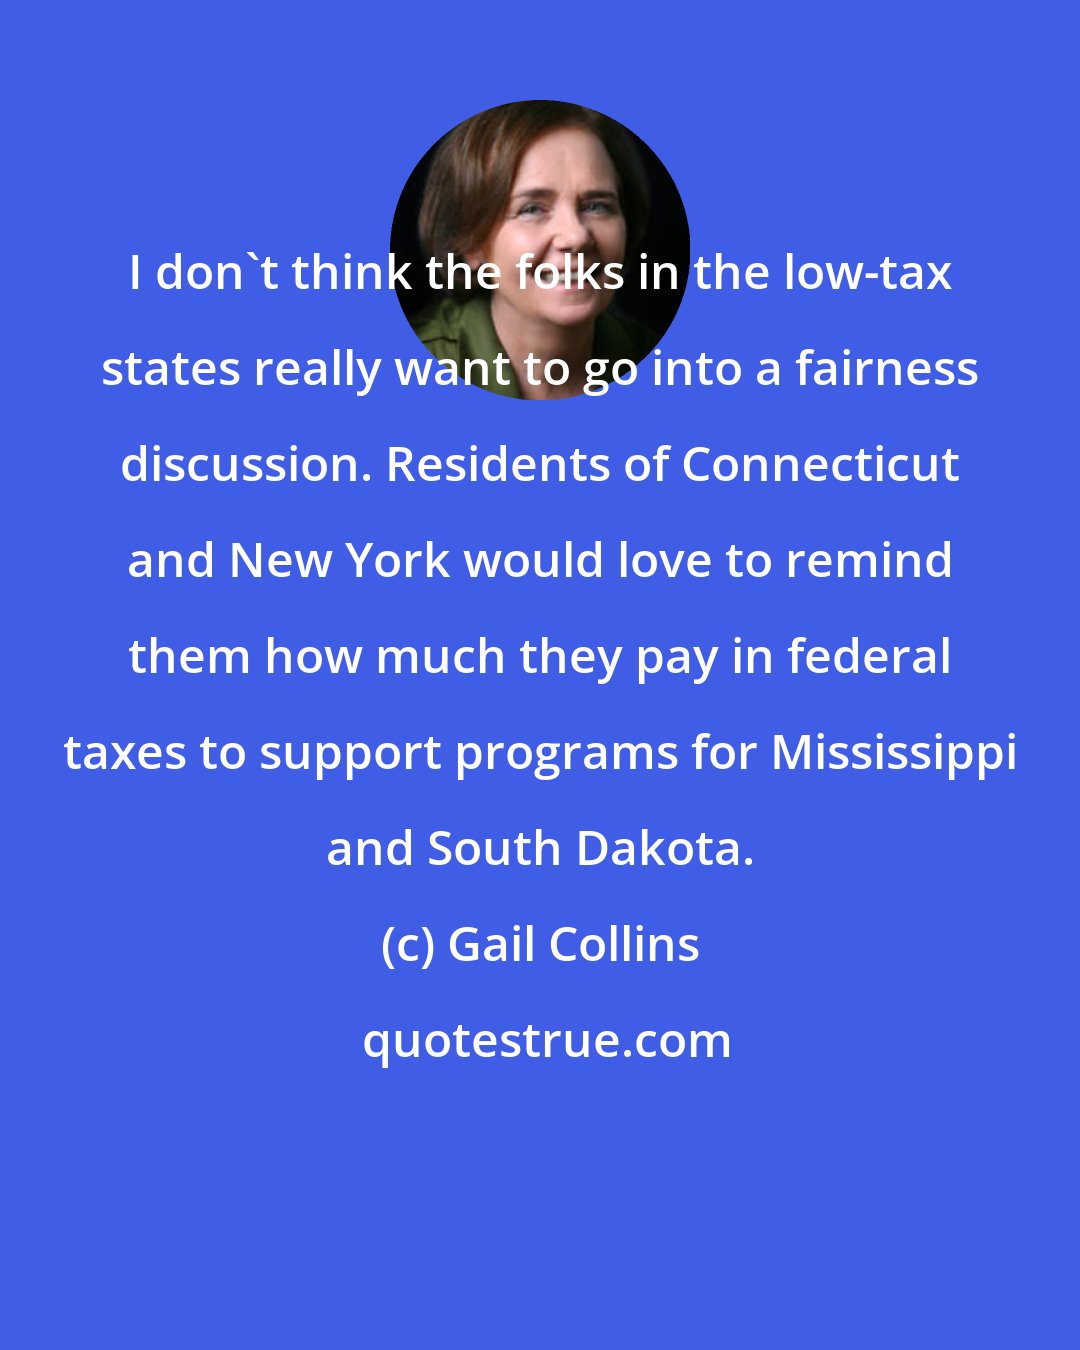 Gail Collins: I don't think the folks in the low-tax states really want to go into a fairness discussion. Residents of Connecticut and New York would love to remind them how much they pay in federal taxes to support programs for Mississippi and South Dakota.